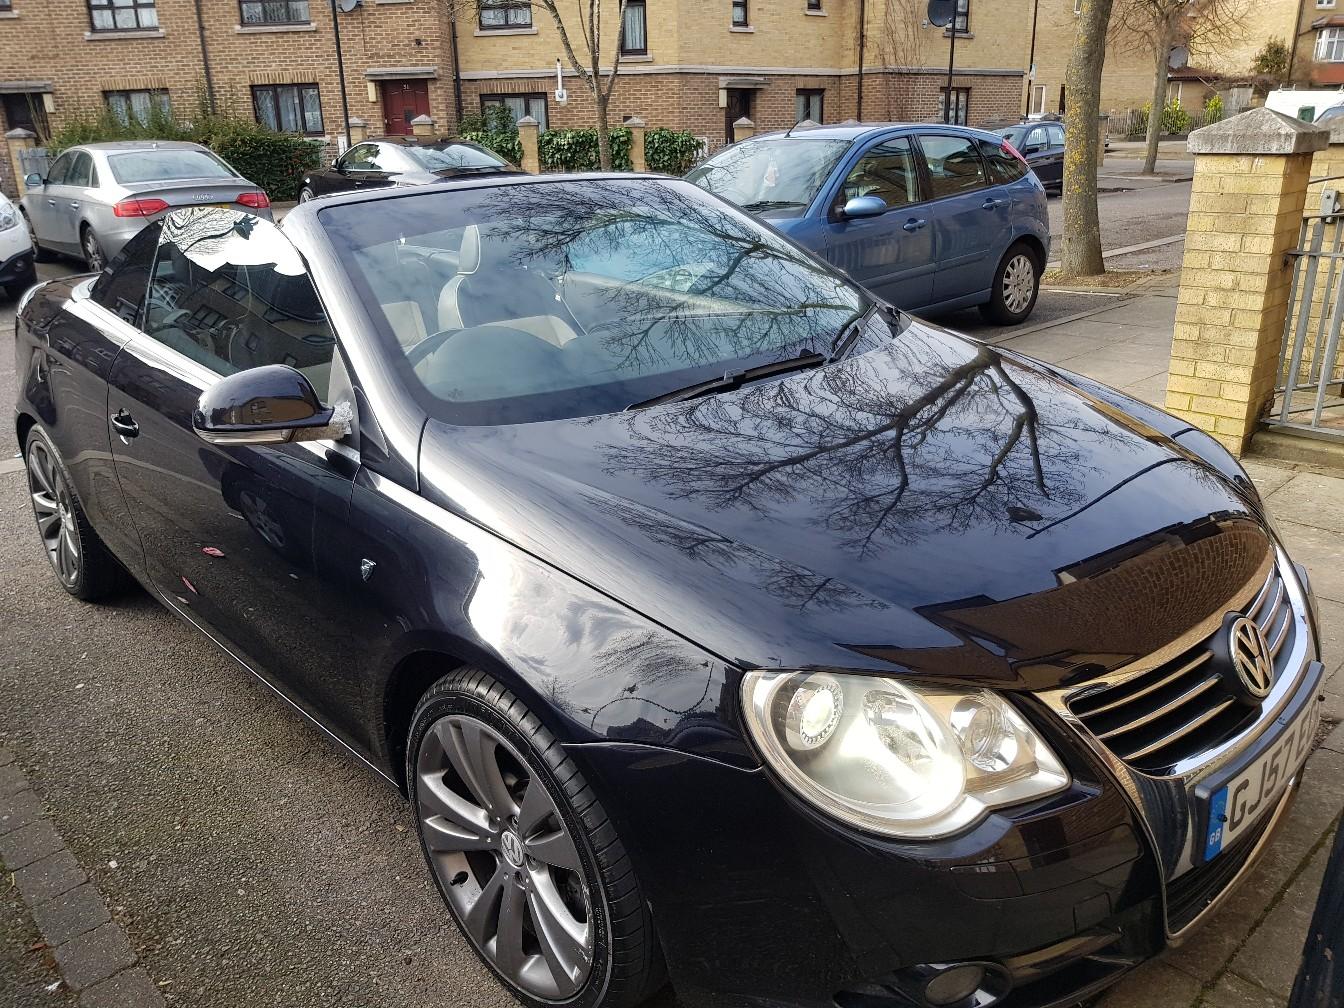 Vw eos 3.2 v6 250 bhp in E11 Forest for £2,699.00 for sale